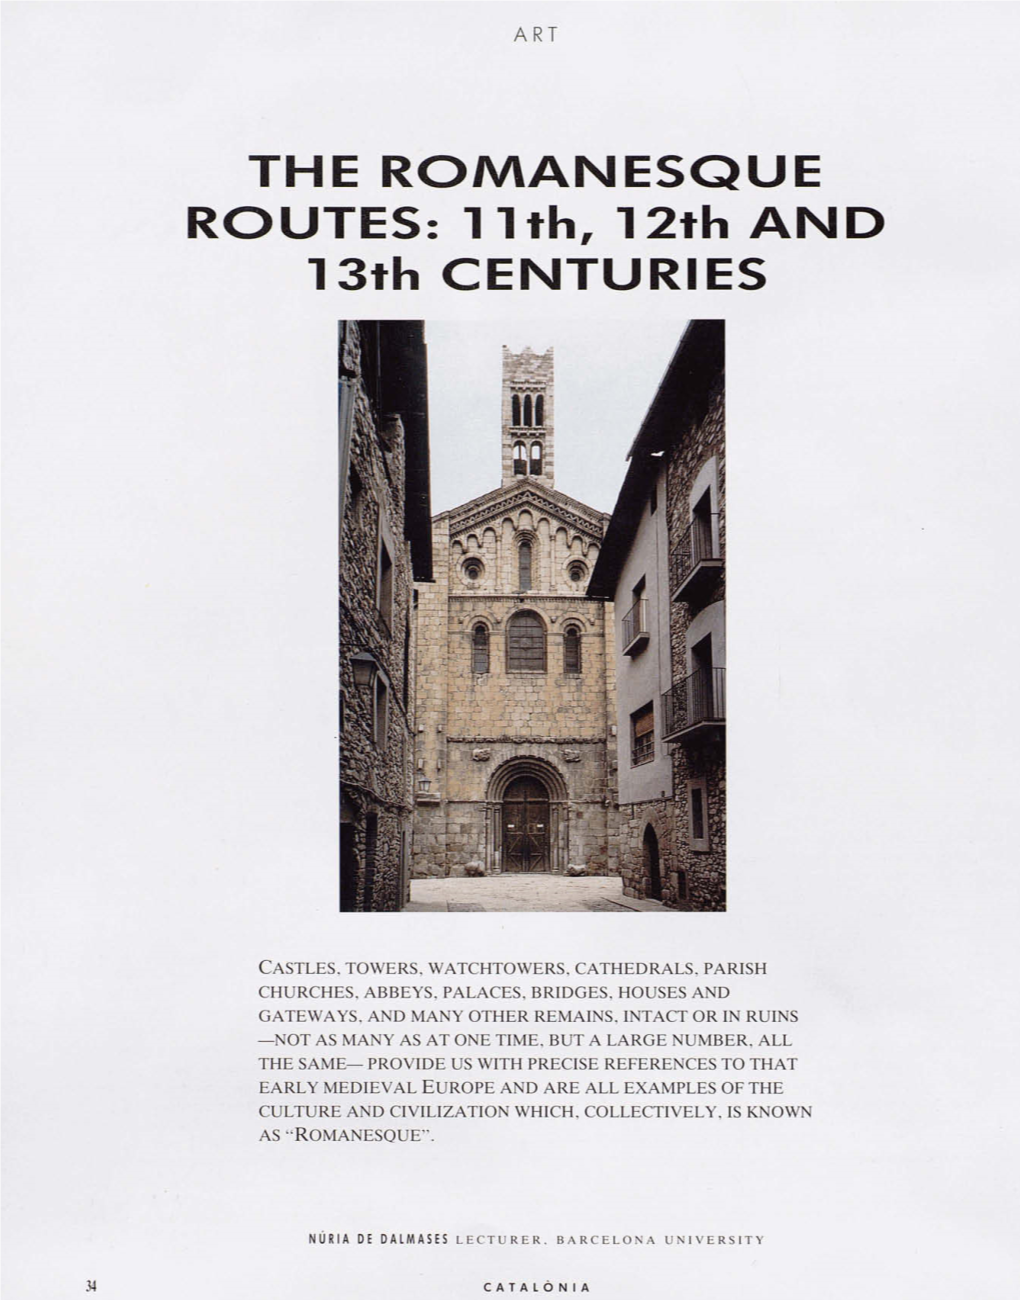 THE ROMANESQUE ROUTES: 1 1Th, 12Th and 13Th CENTURIES